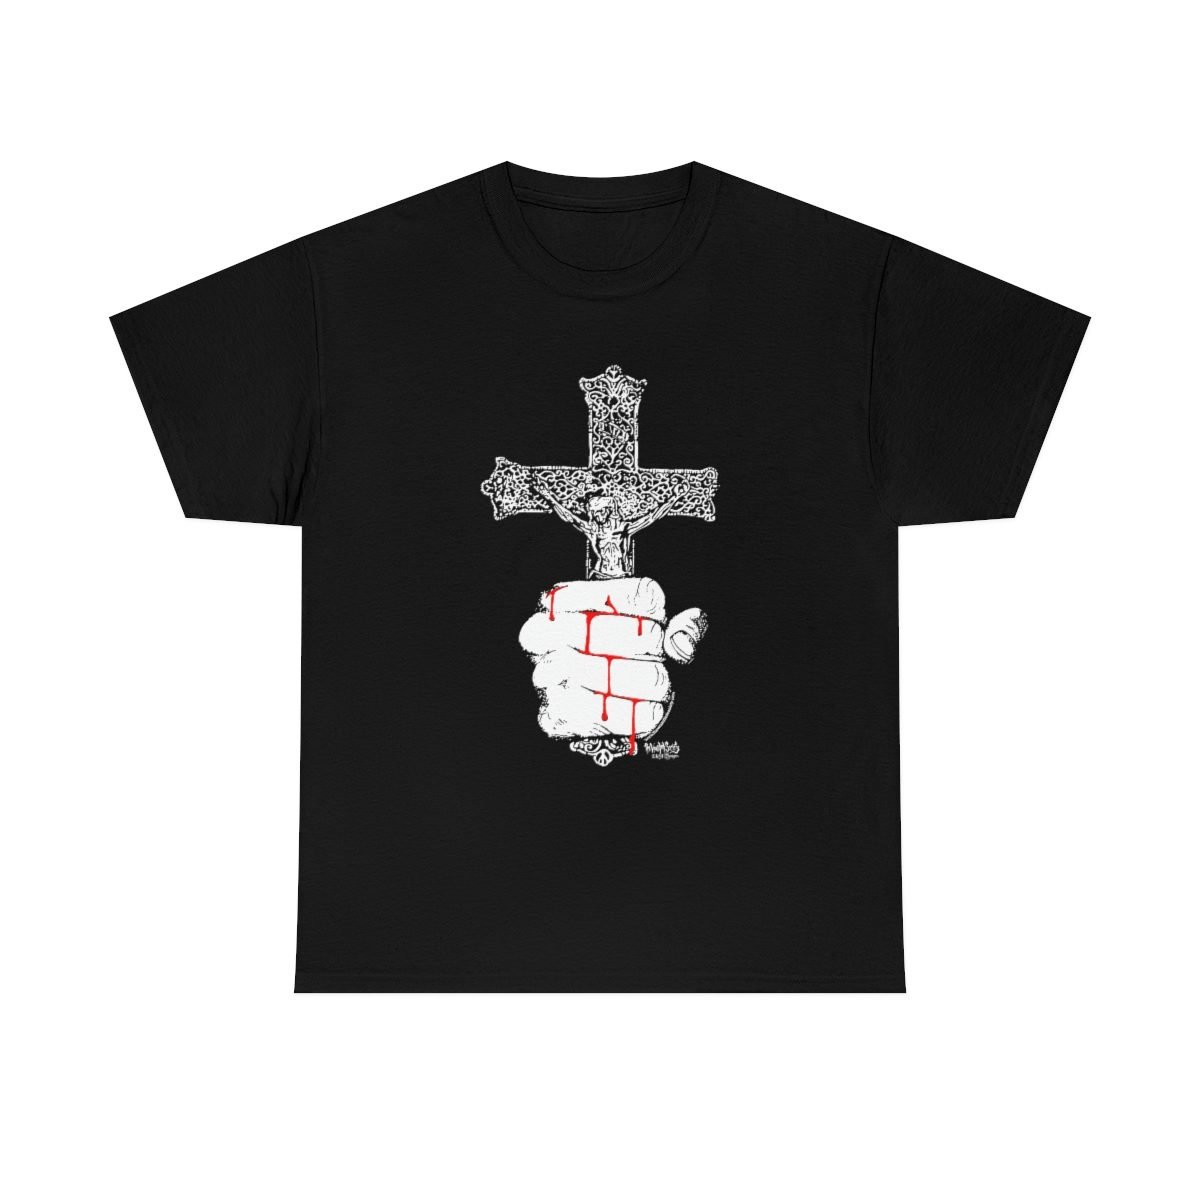 The Struggle by The Wounded Society Short Sleeve Tshirt